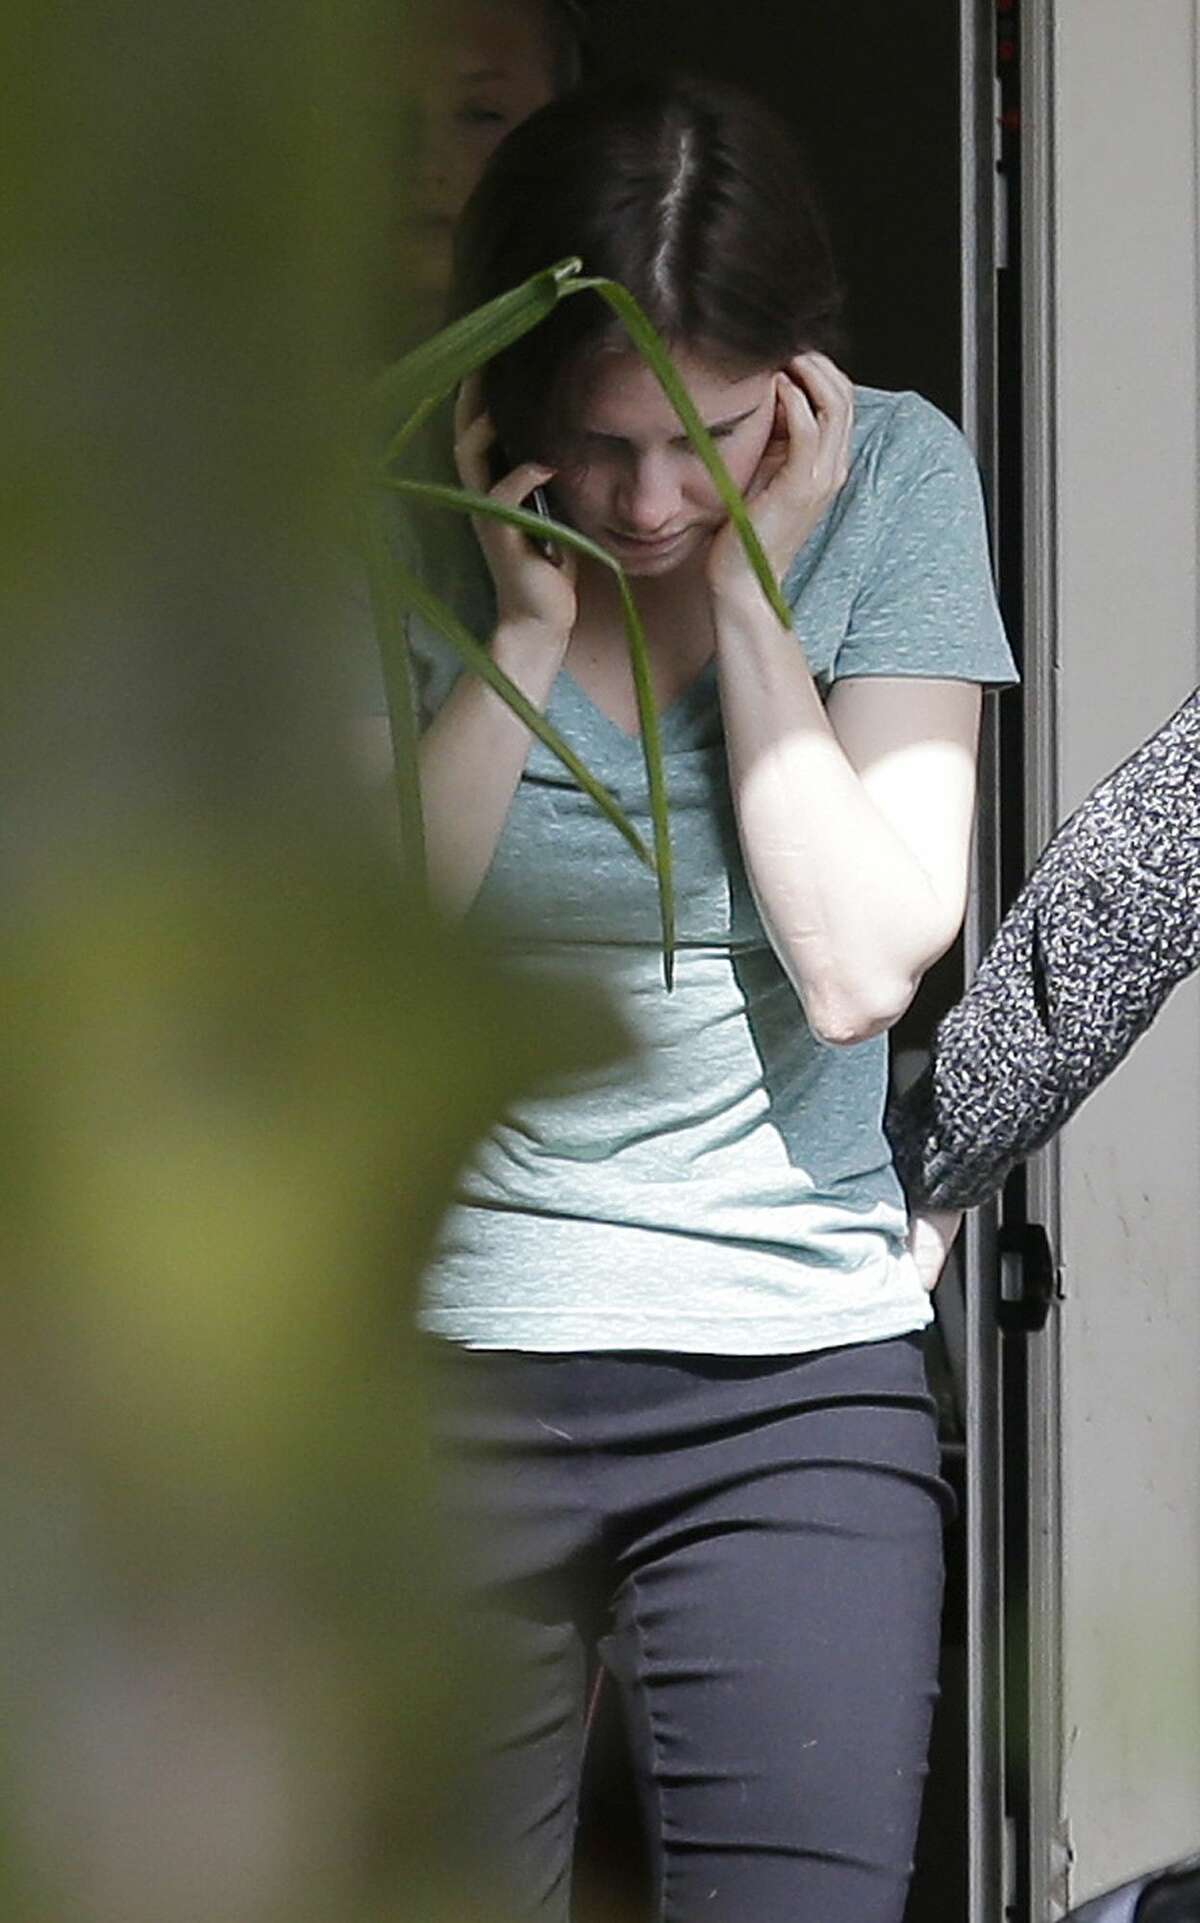 Amanda Knox talks on a phone in the backyard of her mother’s house Friday, March 27, 2015, in Seattle. Italy’s highest court overturned the murder conviction against Knox and her ex-boyfriend Friday over the 2007 slaying of Knox’s roommate, bringing to a definitive end the high-profile case that captivated trial-watchers on both sides of the Atlantic.